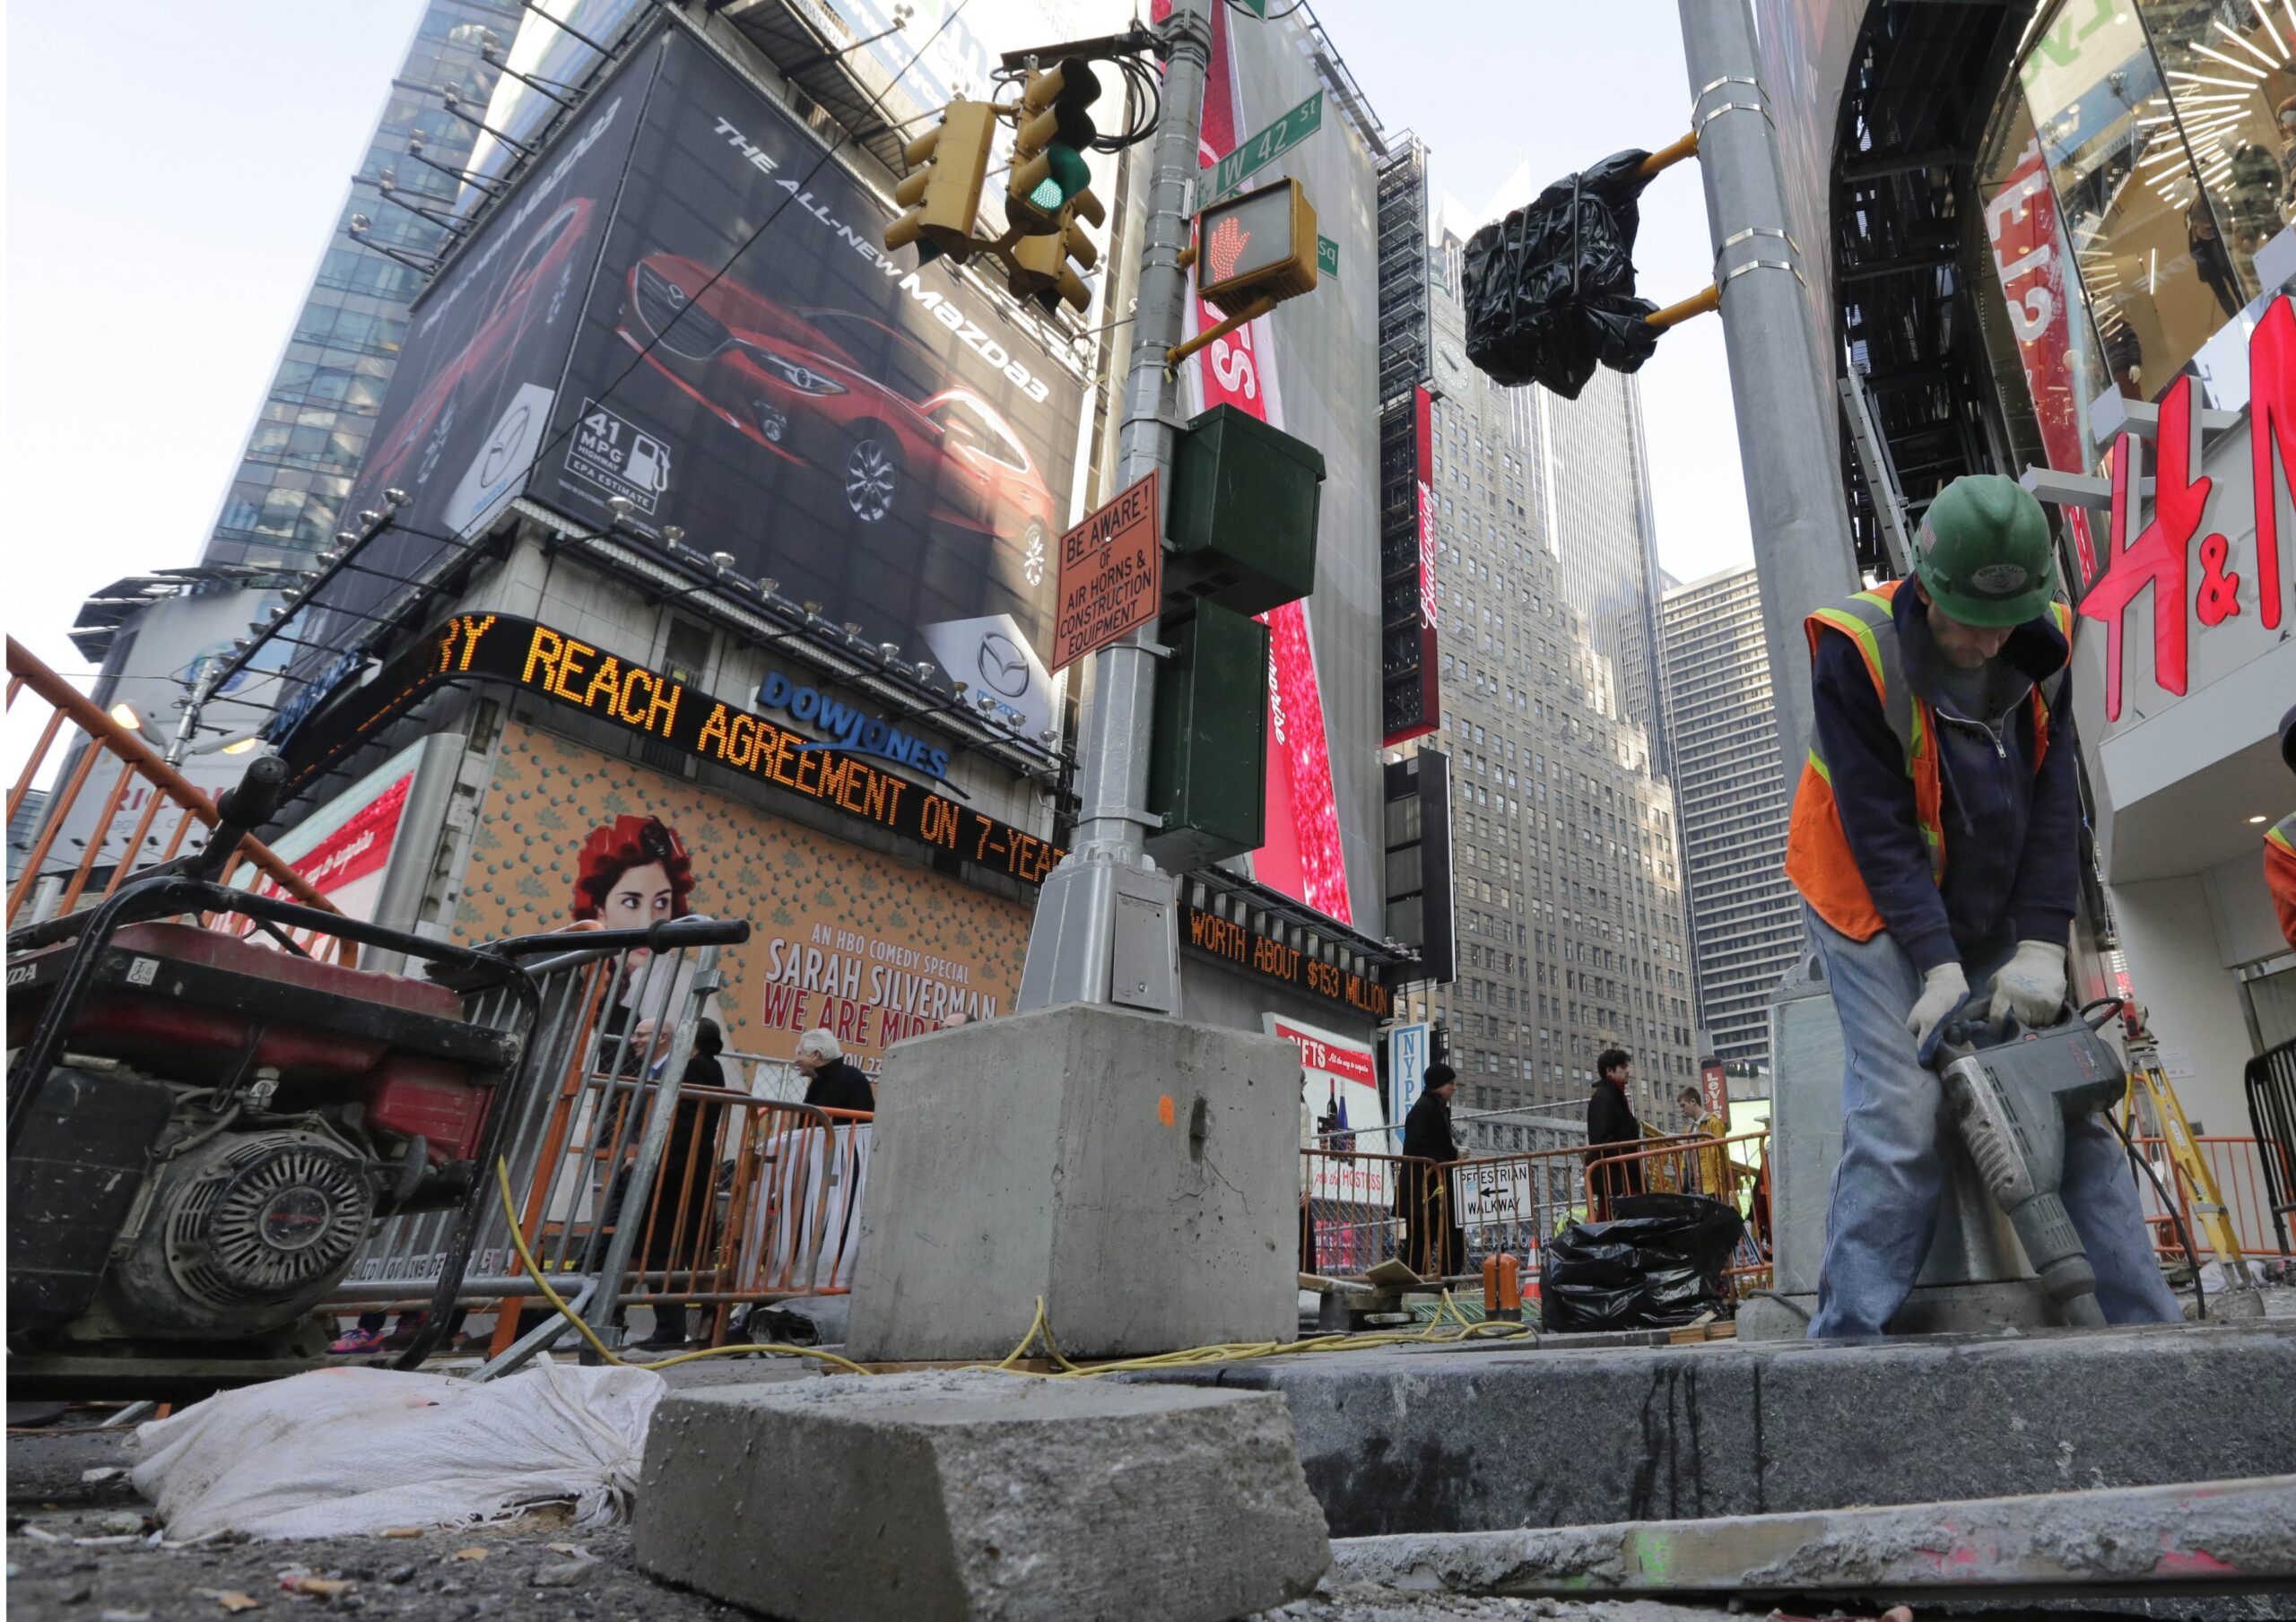 A workers operates a jackhammer in New York City's Times Square